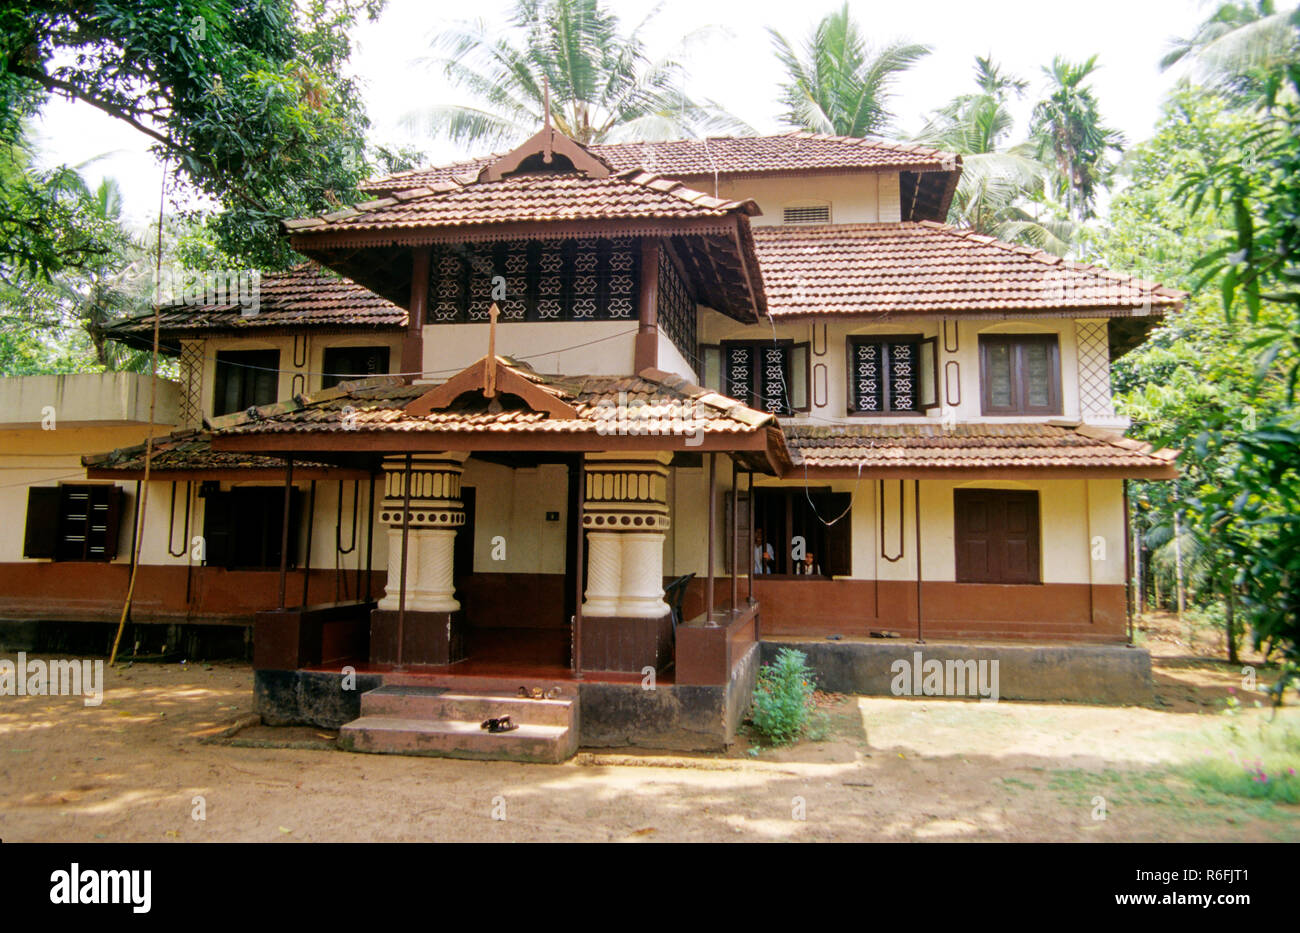 Kerala Village Houses High Resolution Stock Photography And Images